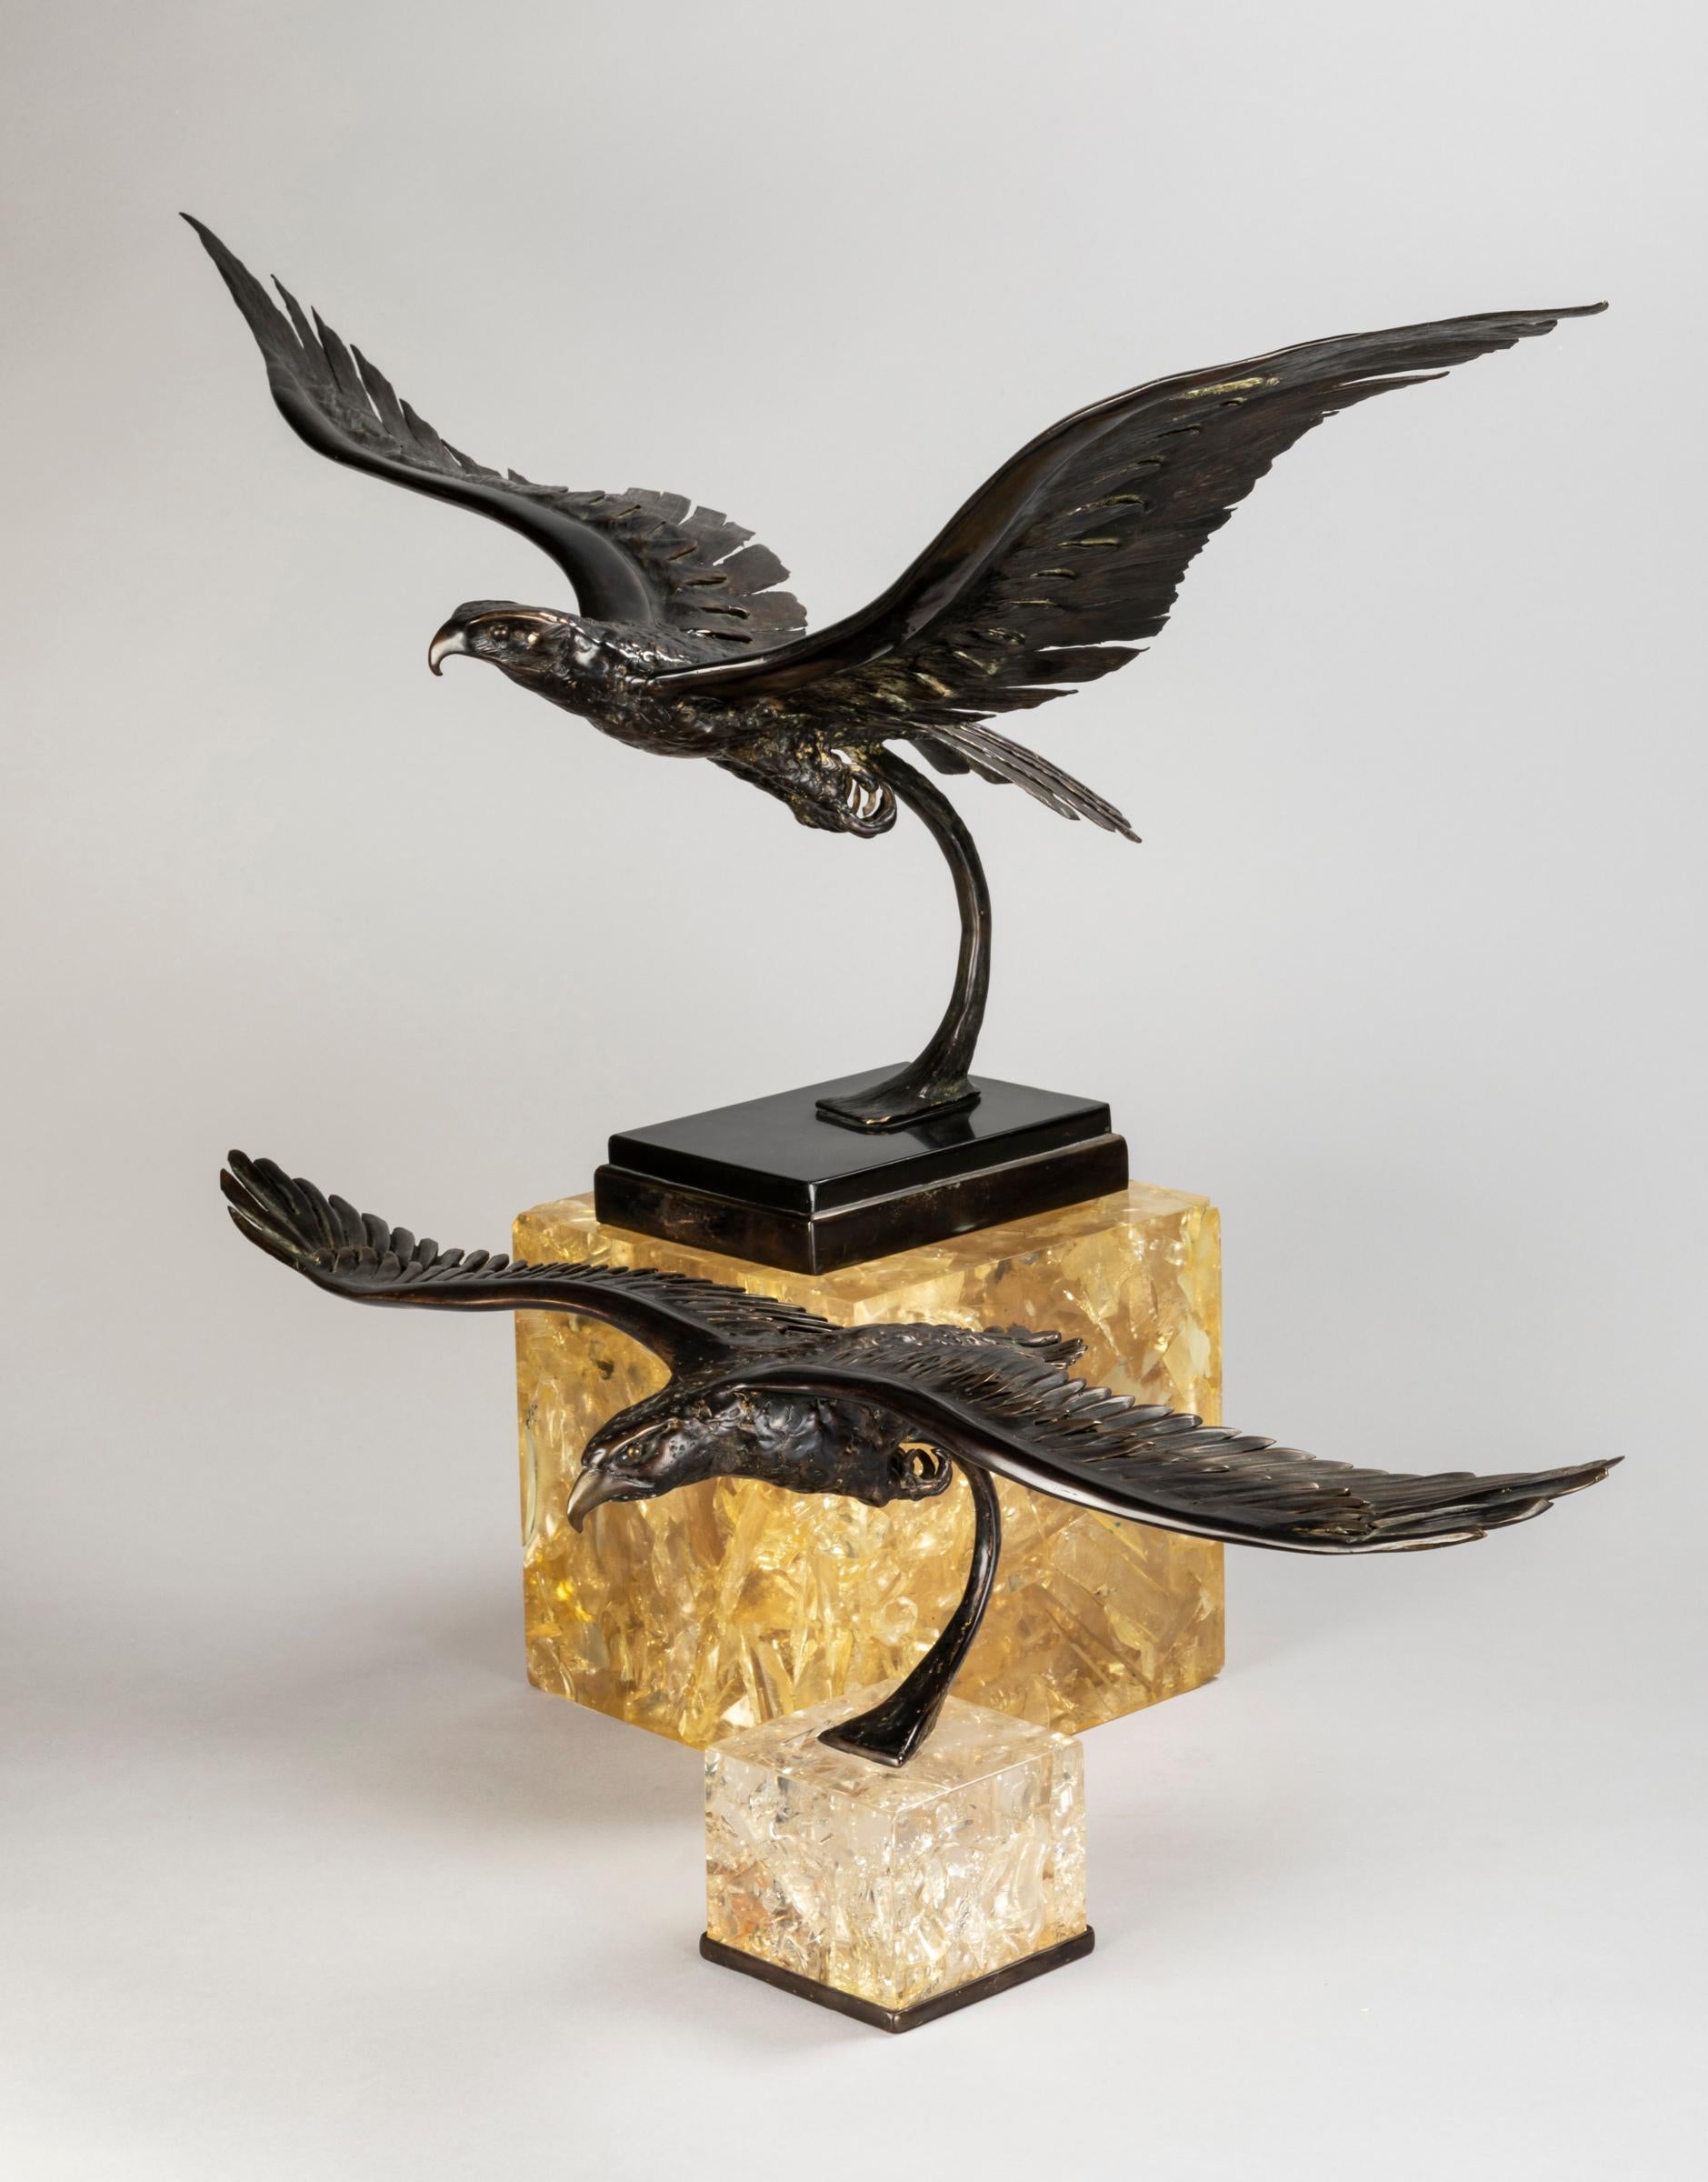 Two superbs flying eagles in bronze sitting on fractal resin cubes (slightly champagne, gold color).These two rare sculptures have been created by famous French artist Jacques Duval Brasseur who was inspired by nature. He lover to mixe bronze with